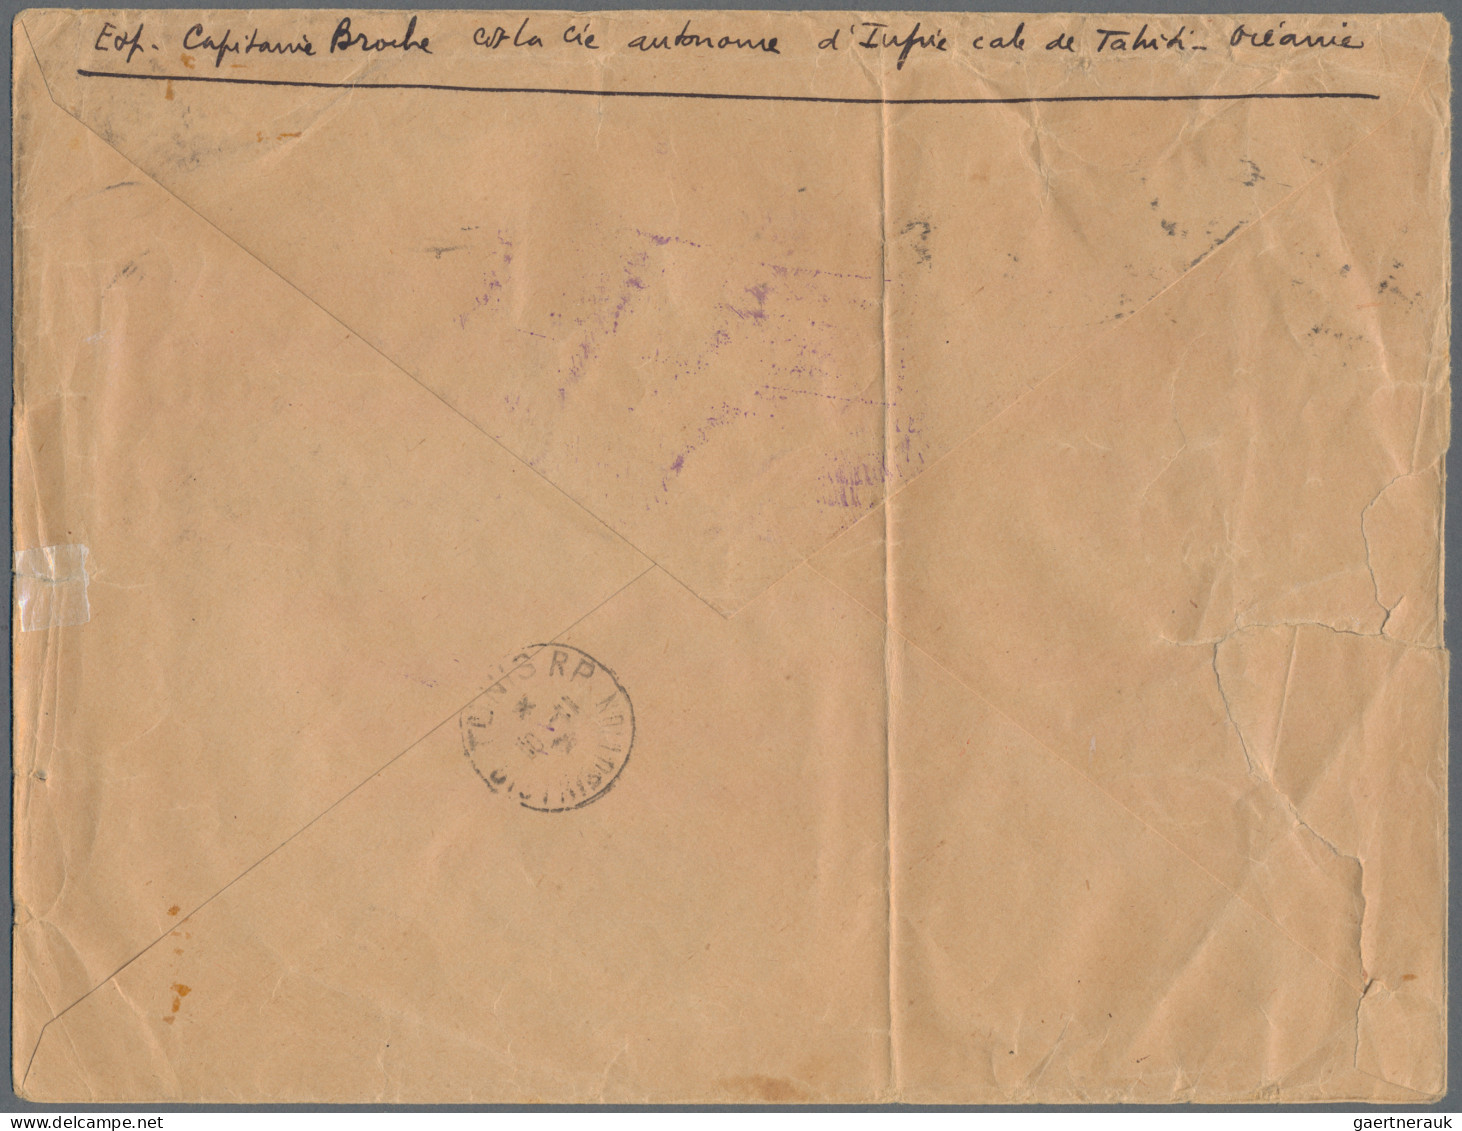 Tahiti: 1939 Stampless Envelope Used From Papete To Tunis, Tunisie Cancelled "PA - Tahiti